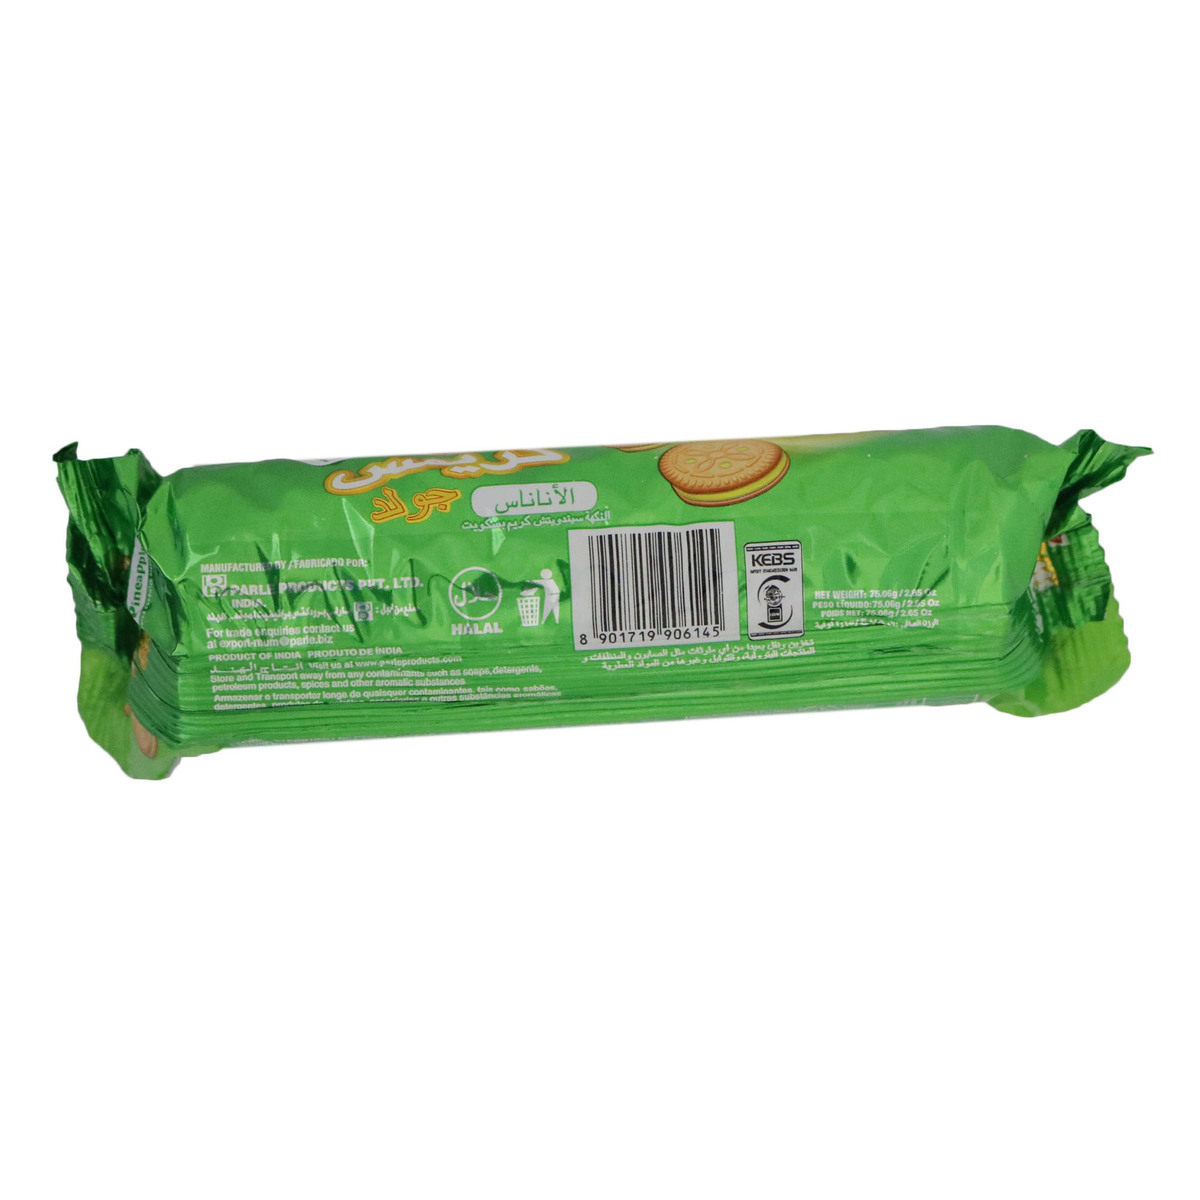 Parle Gold Pineapple Cream Biscuits 50g